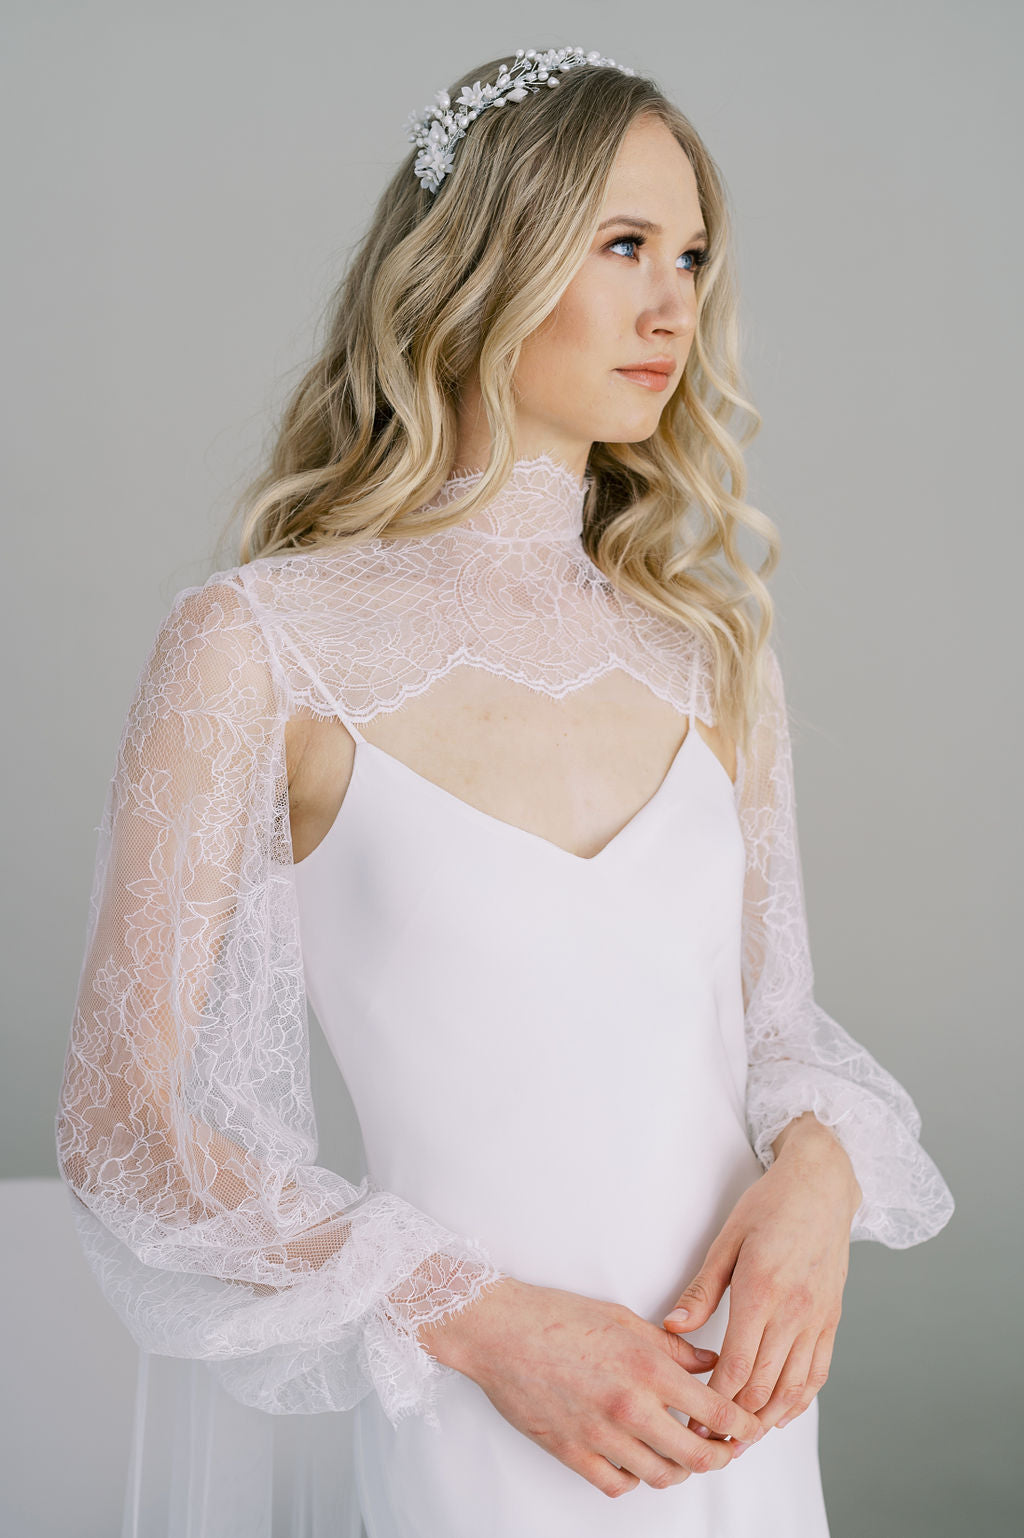 Long lace tulle bridal cape. Handmade by Catherine Langlois, Toronto, Canada